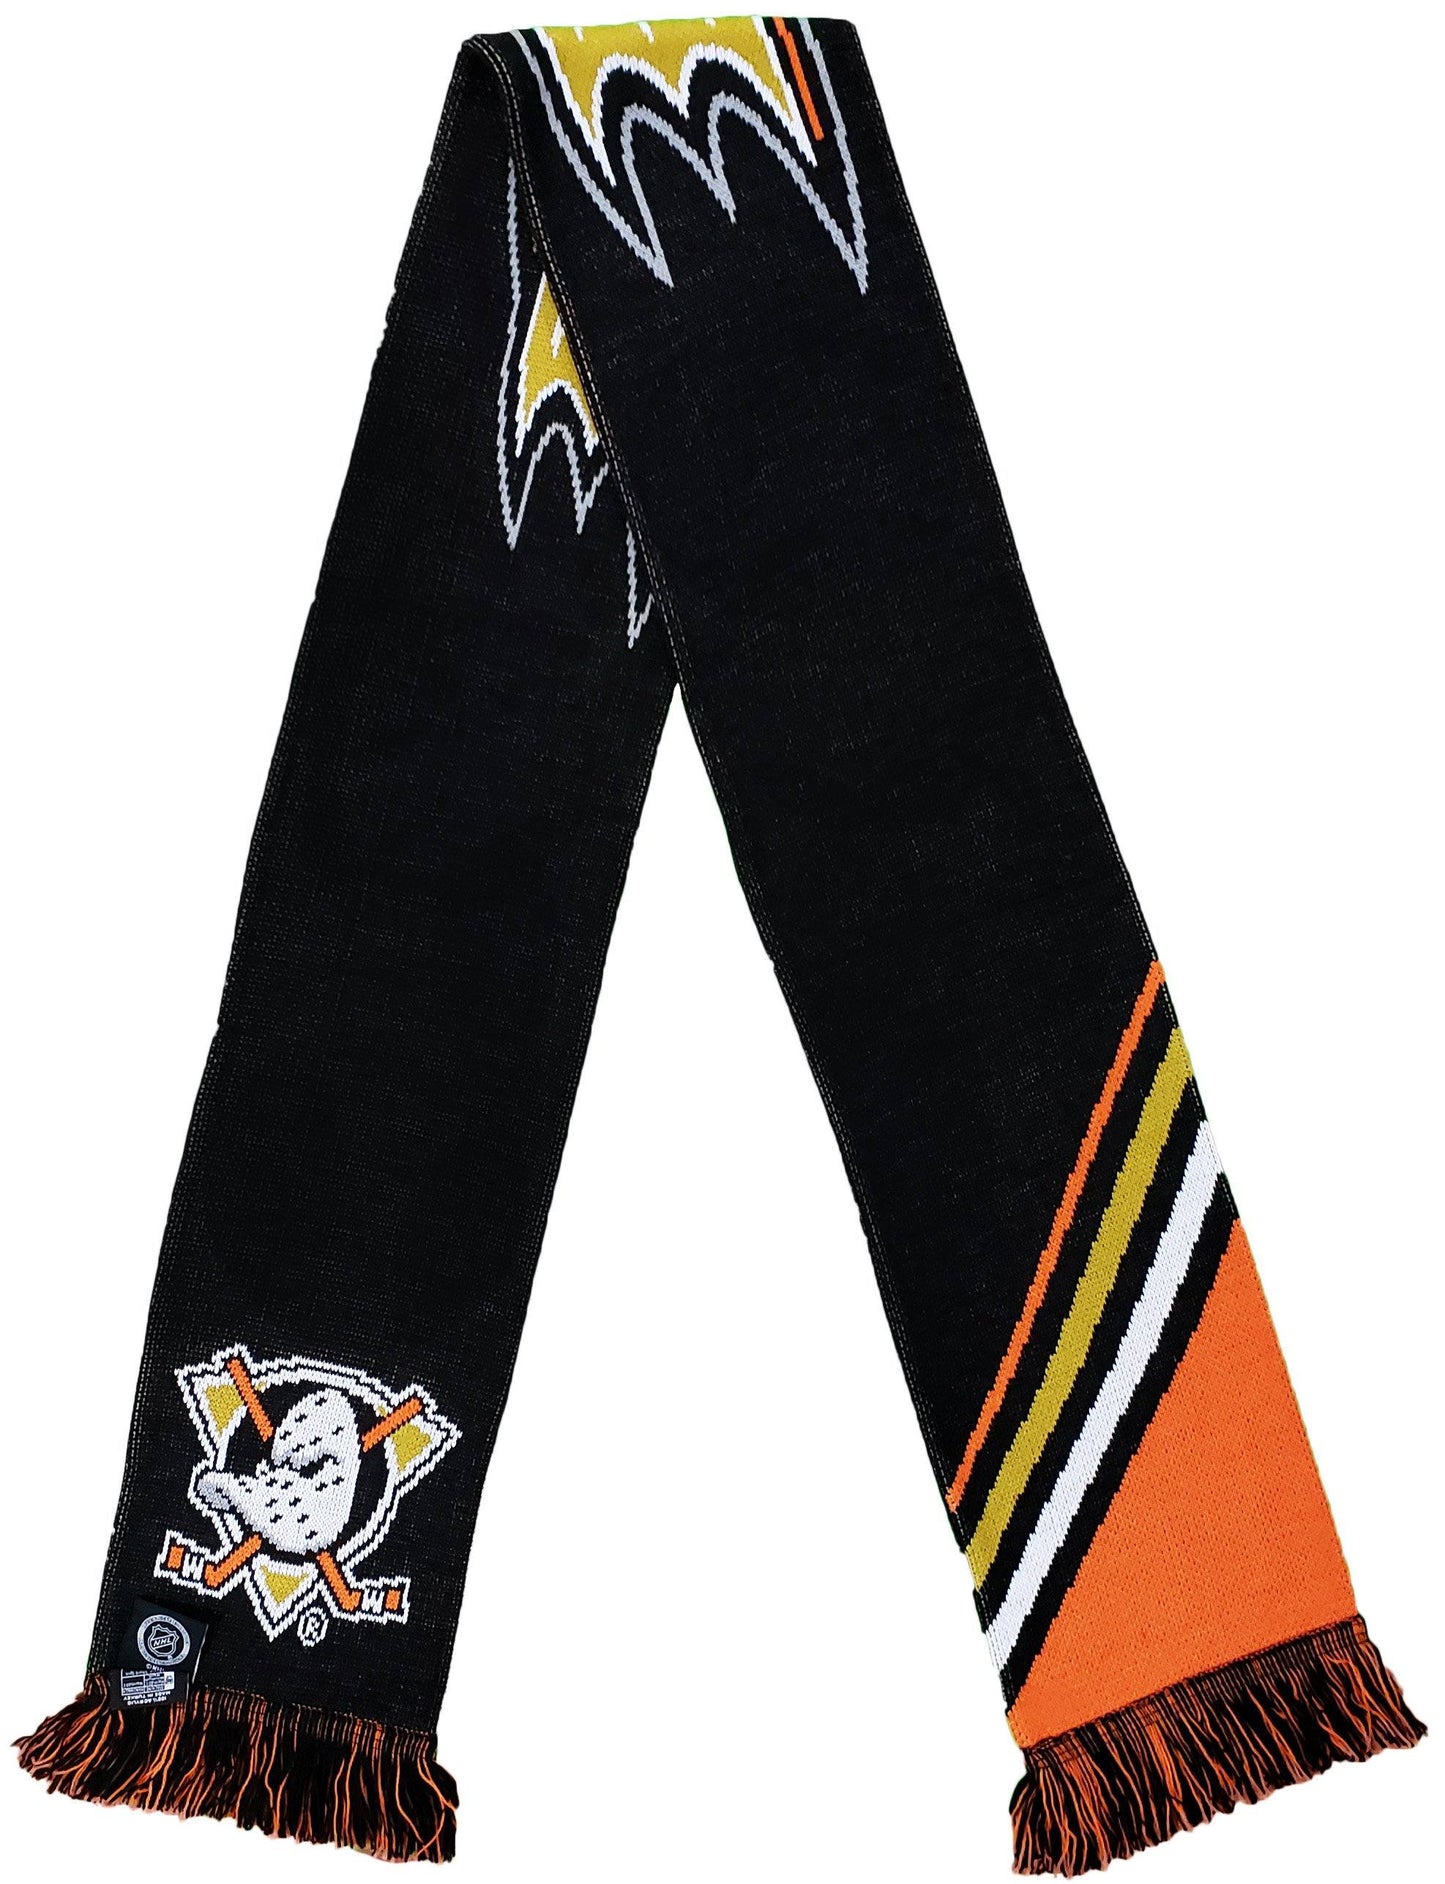 PITTSBURGH PENGUINS SCARF - Home Jersey – Ruffneck Scarves